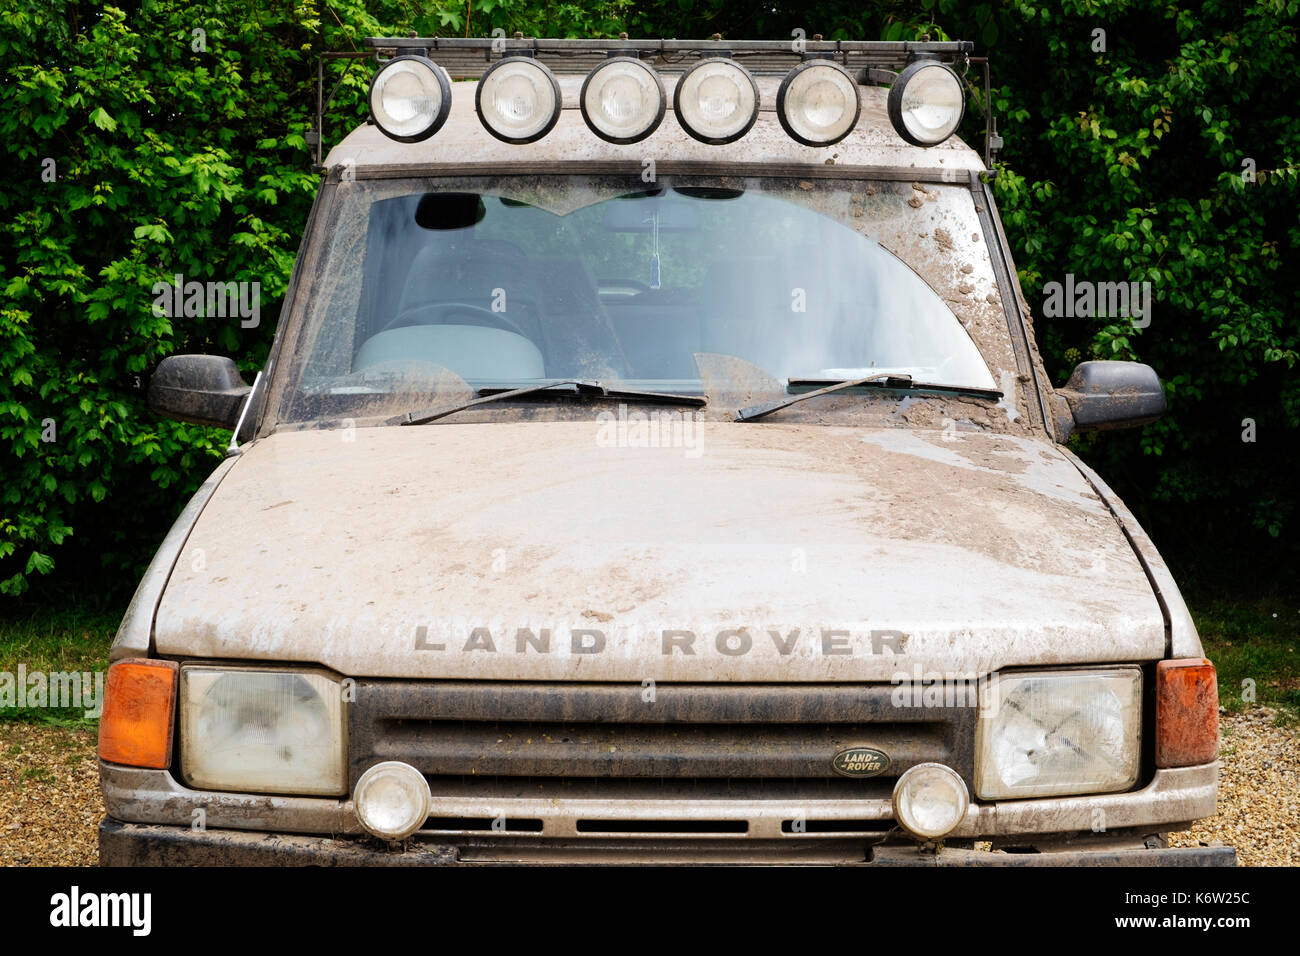 Land Rover Discovery Stock Photo